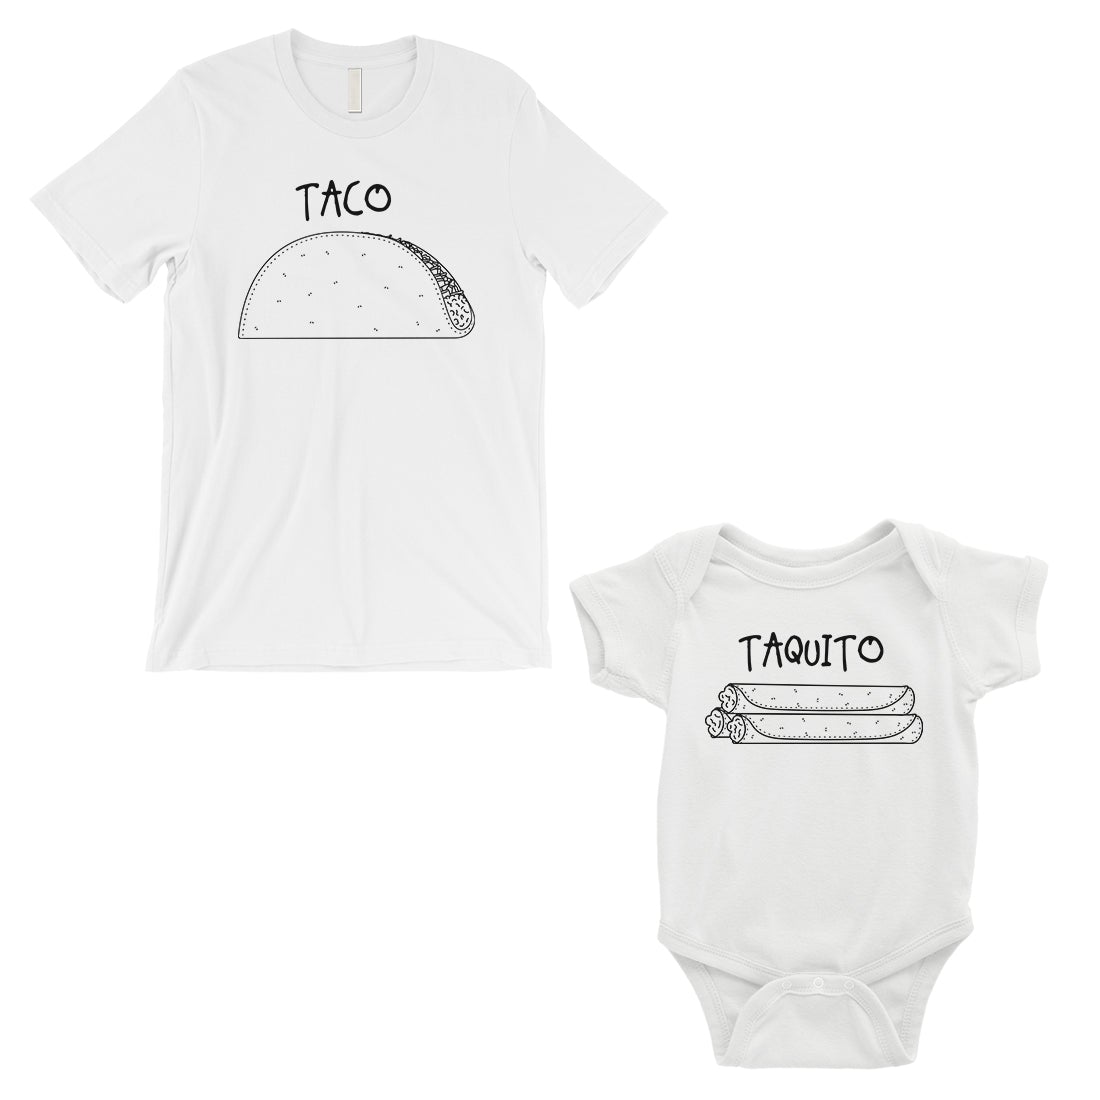 Taco Taquito Dad and Baby Matching Outfits White